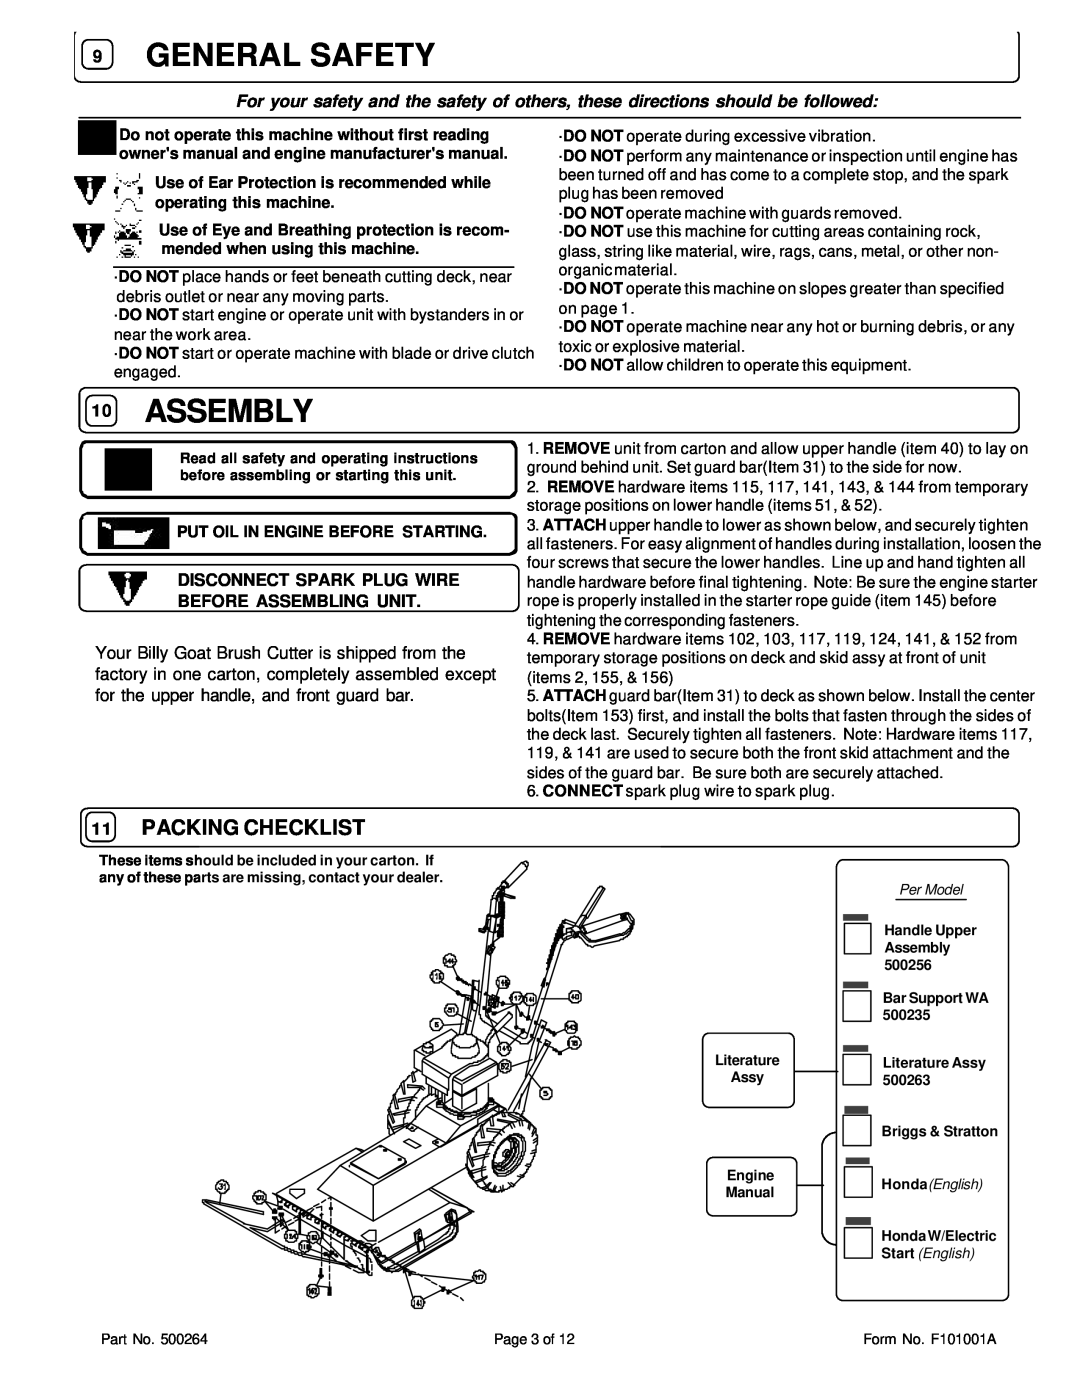 Briggs & Stratton BC2401IC General Safety, Assembly, Packing Checklist, Disconnect Spark Plug Wire Before Assembling Unit 